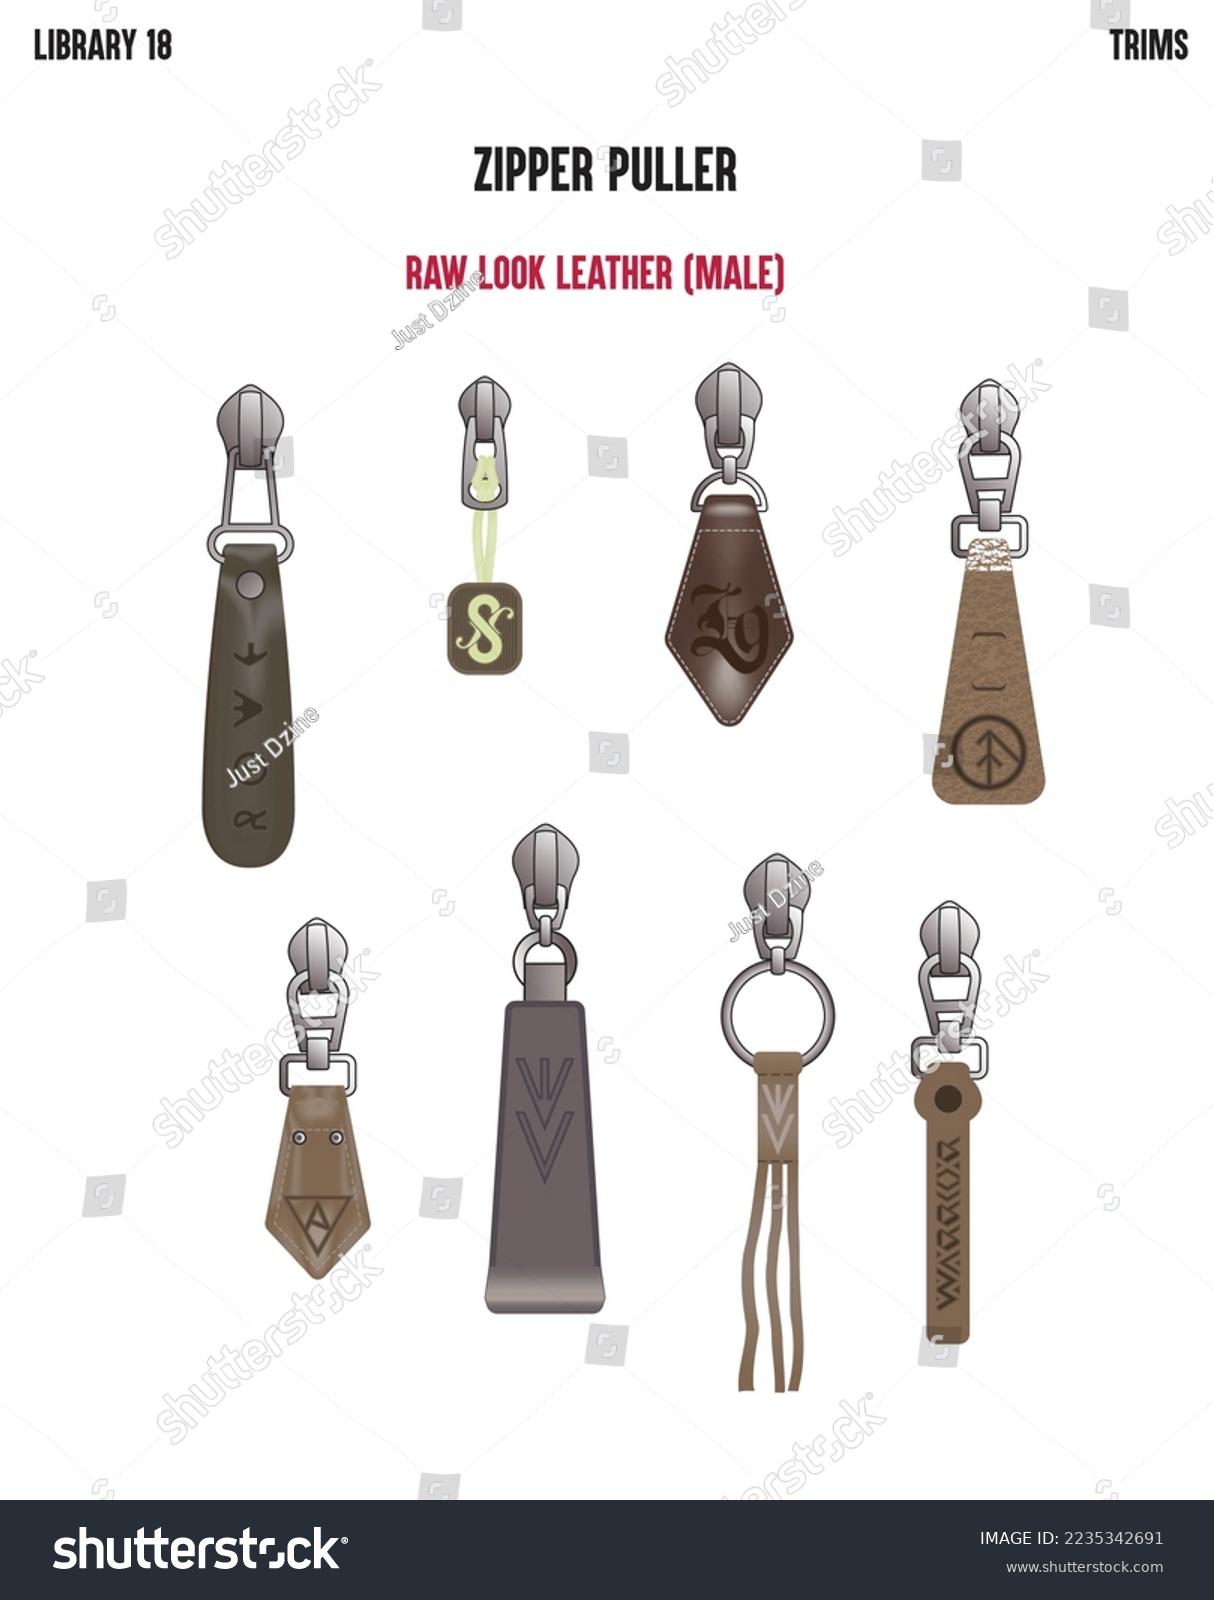 SVG of URBAN FASHION TREND ZIPPER PULLERS WITH LEATHER DESIGNS FOR YOUND MEN AND MEN IN VECTOR SKETCH svg